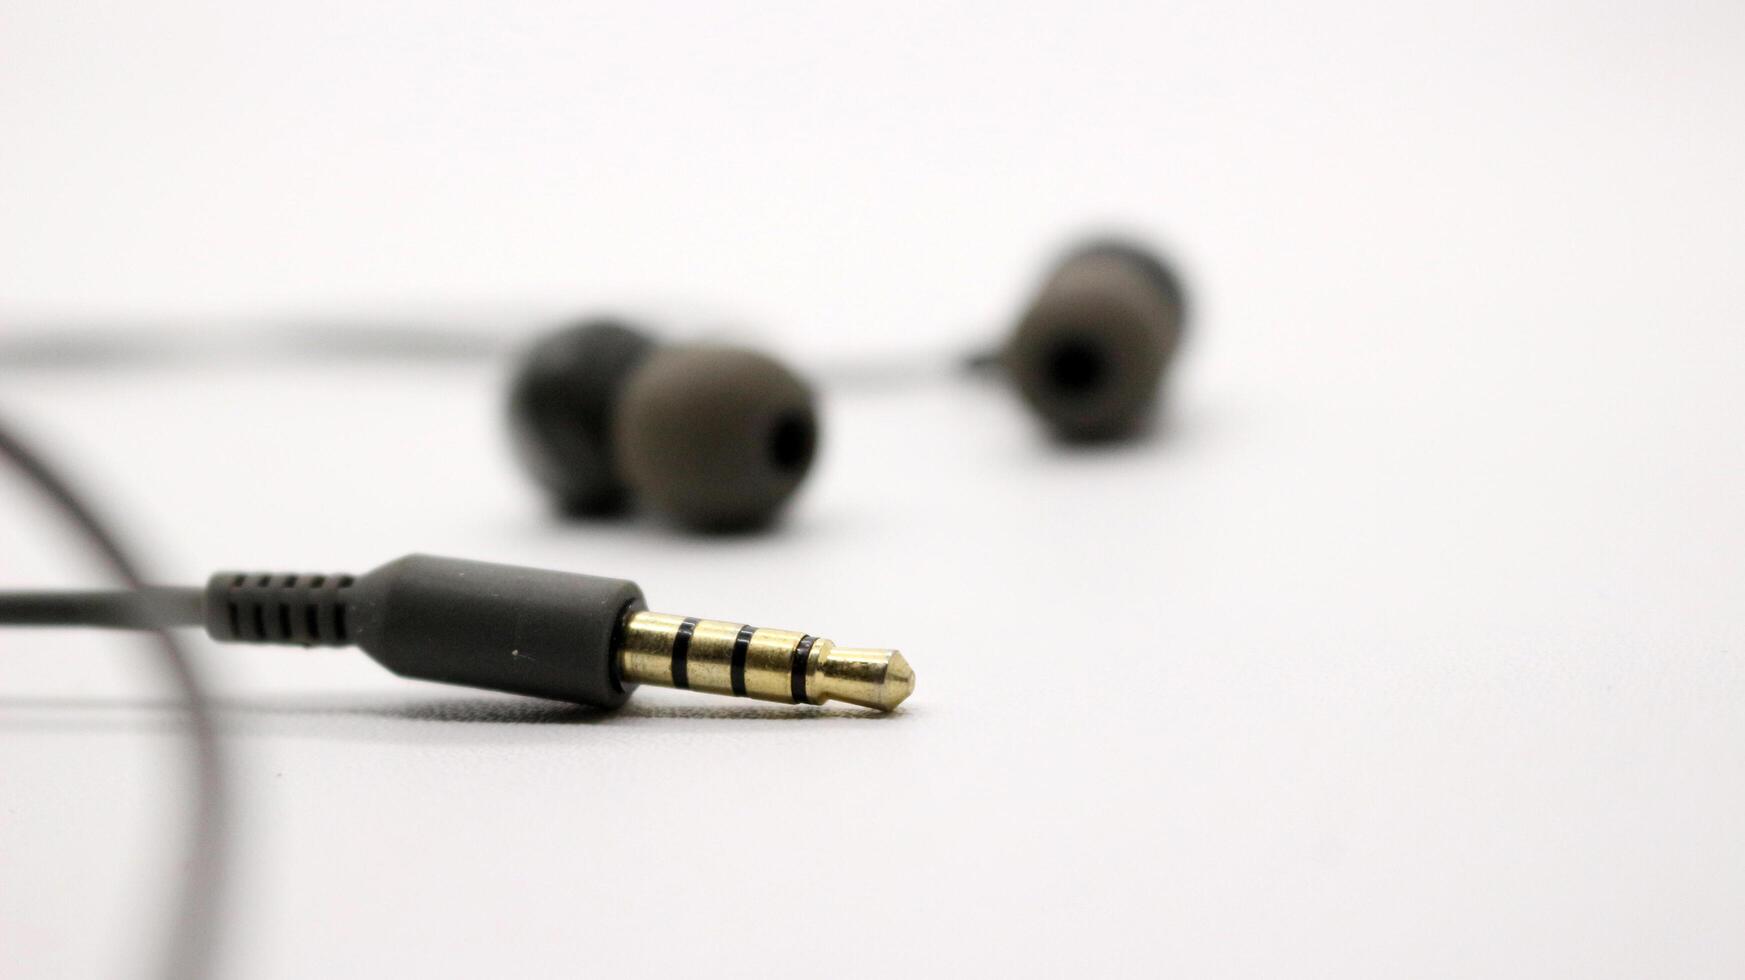 Close up of black wired earphones photo